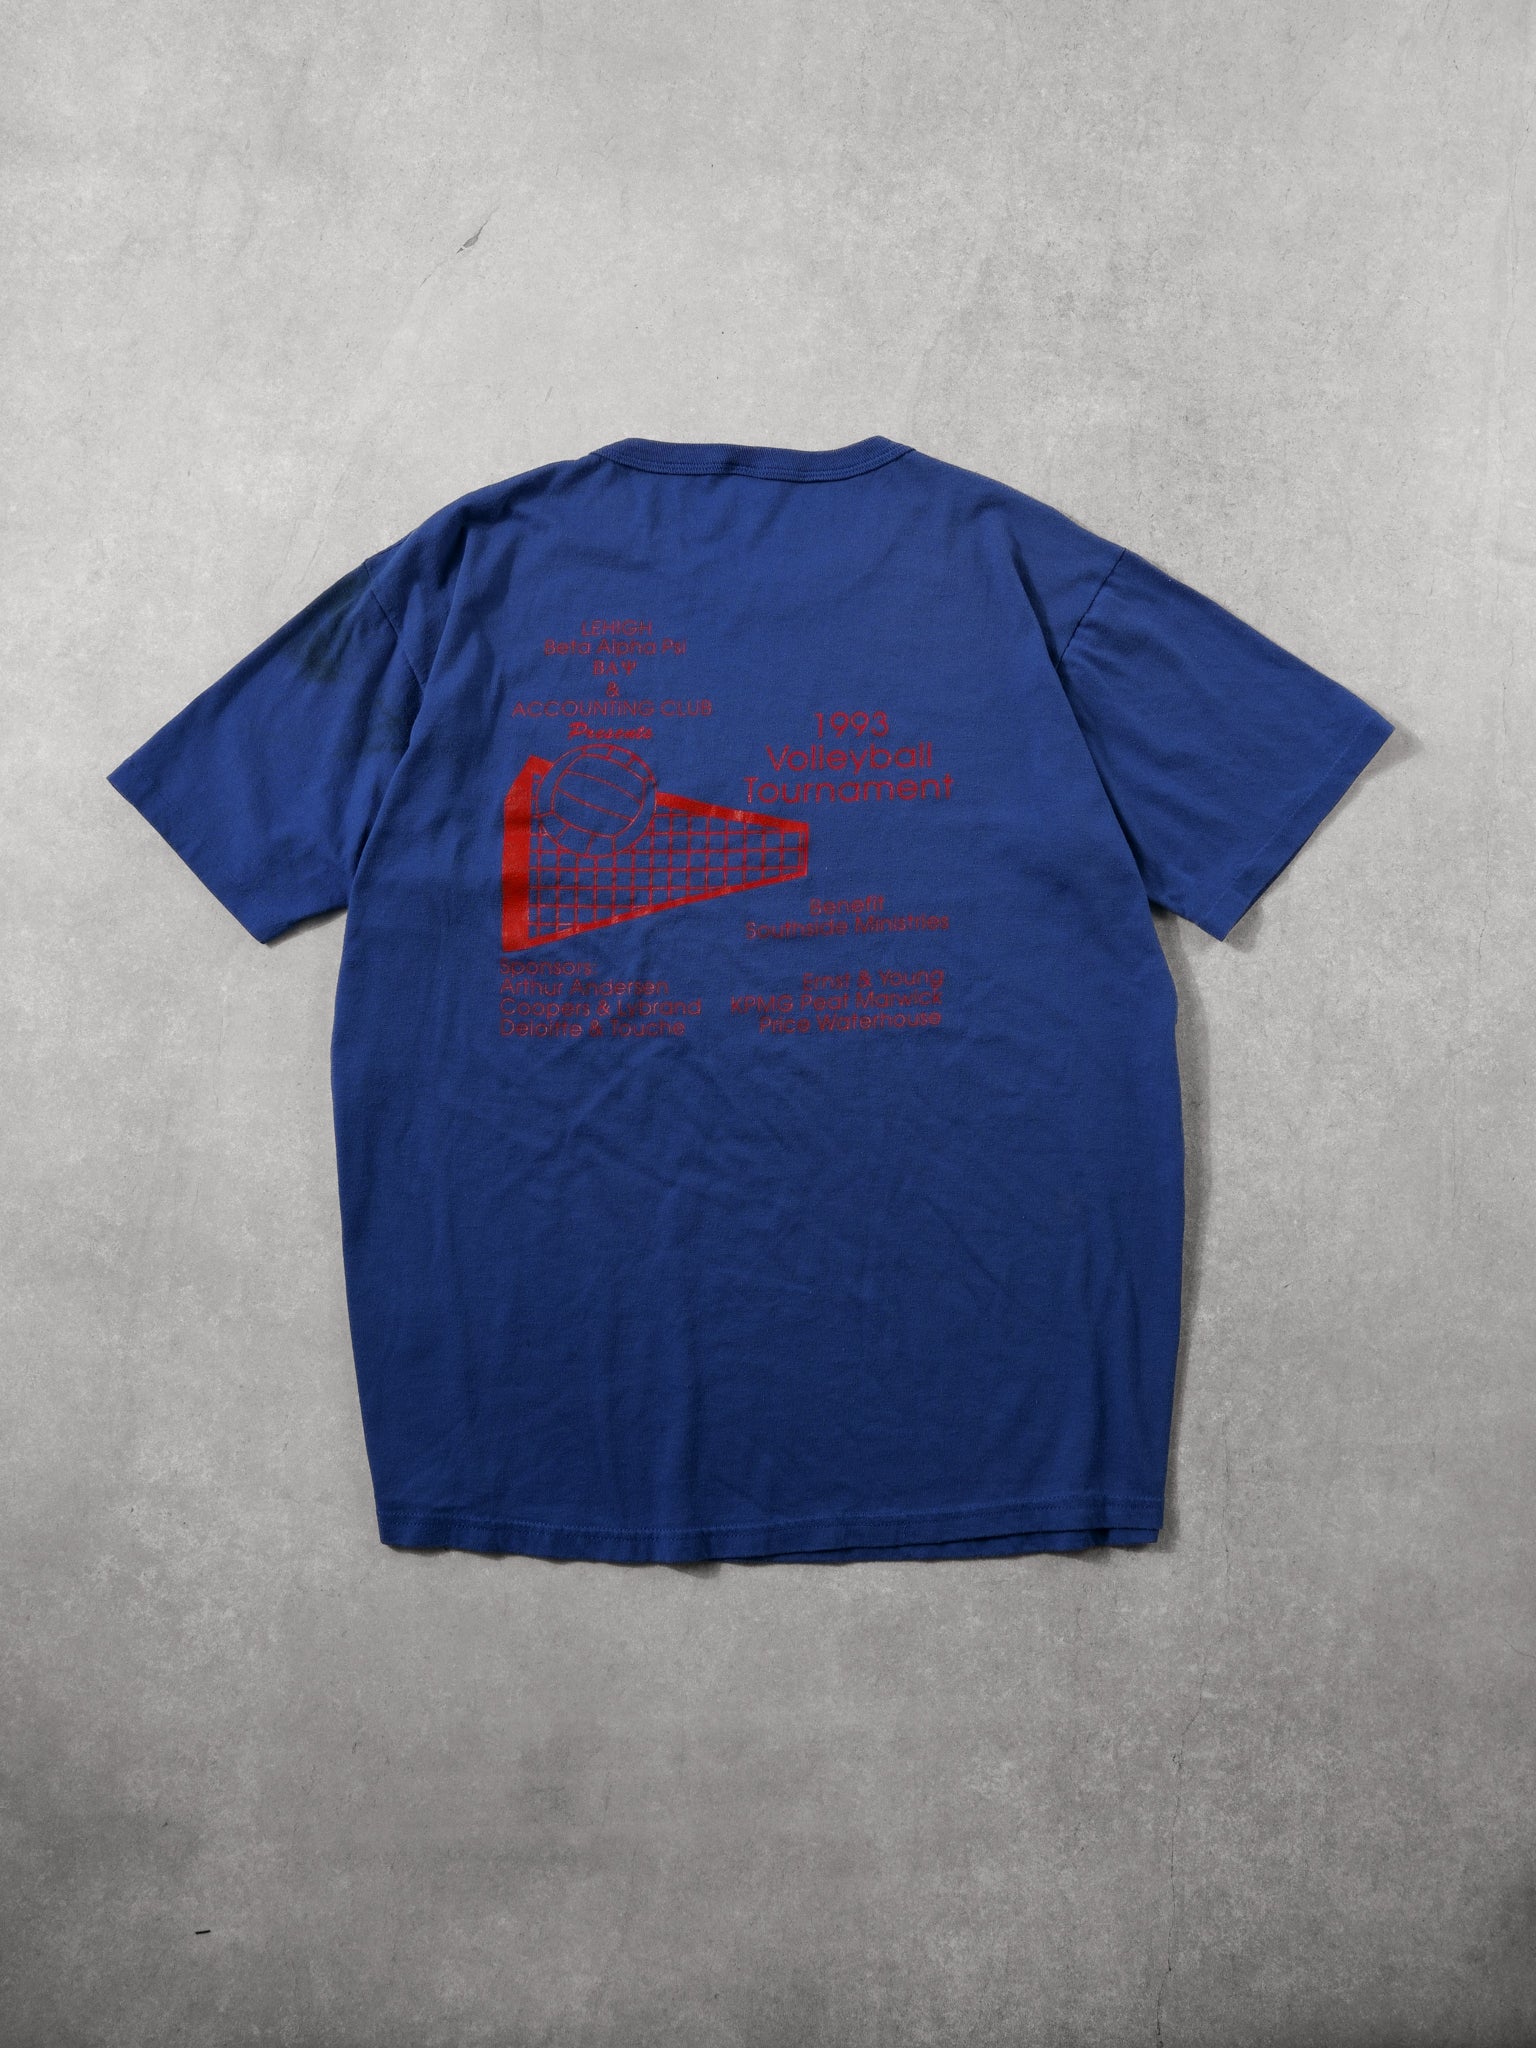 Vintage 93' Blue And Red Lehigh Beta Alpha PSI Volleyball Tournament Tee (L)